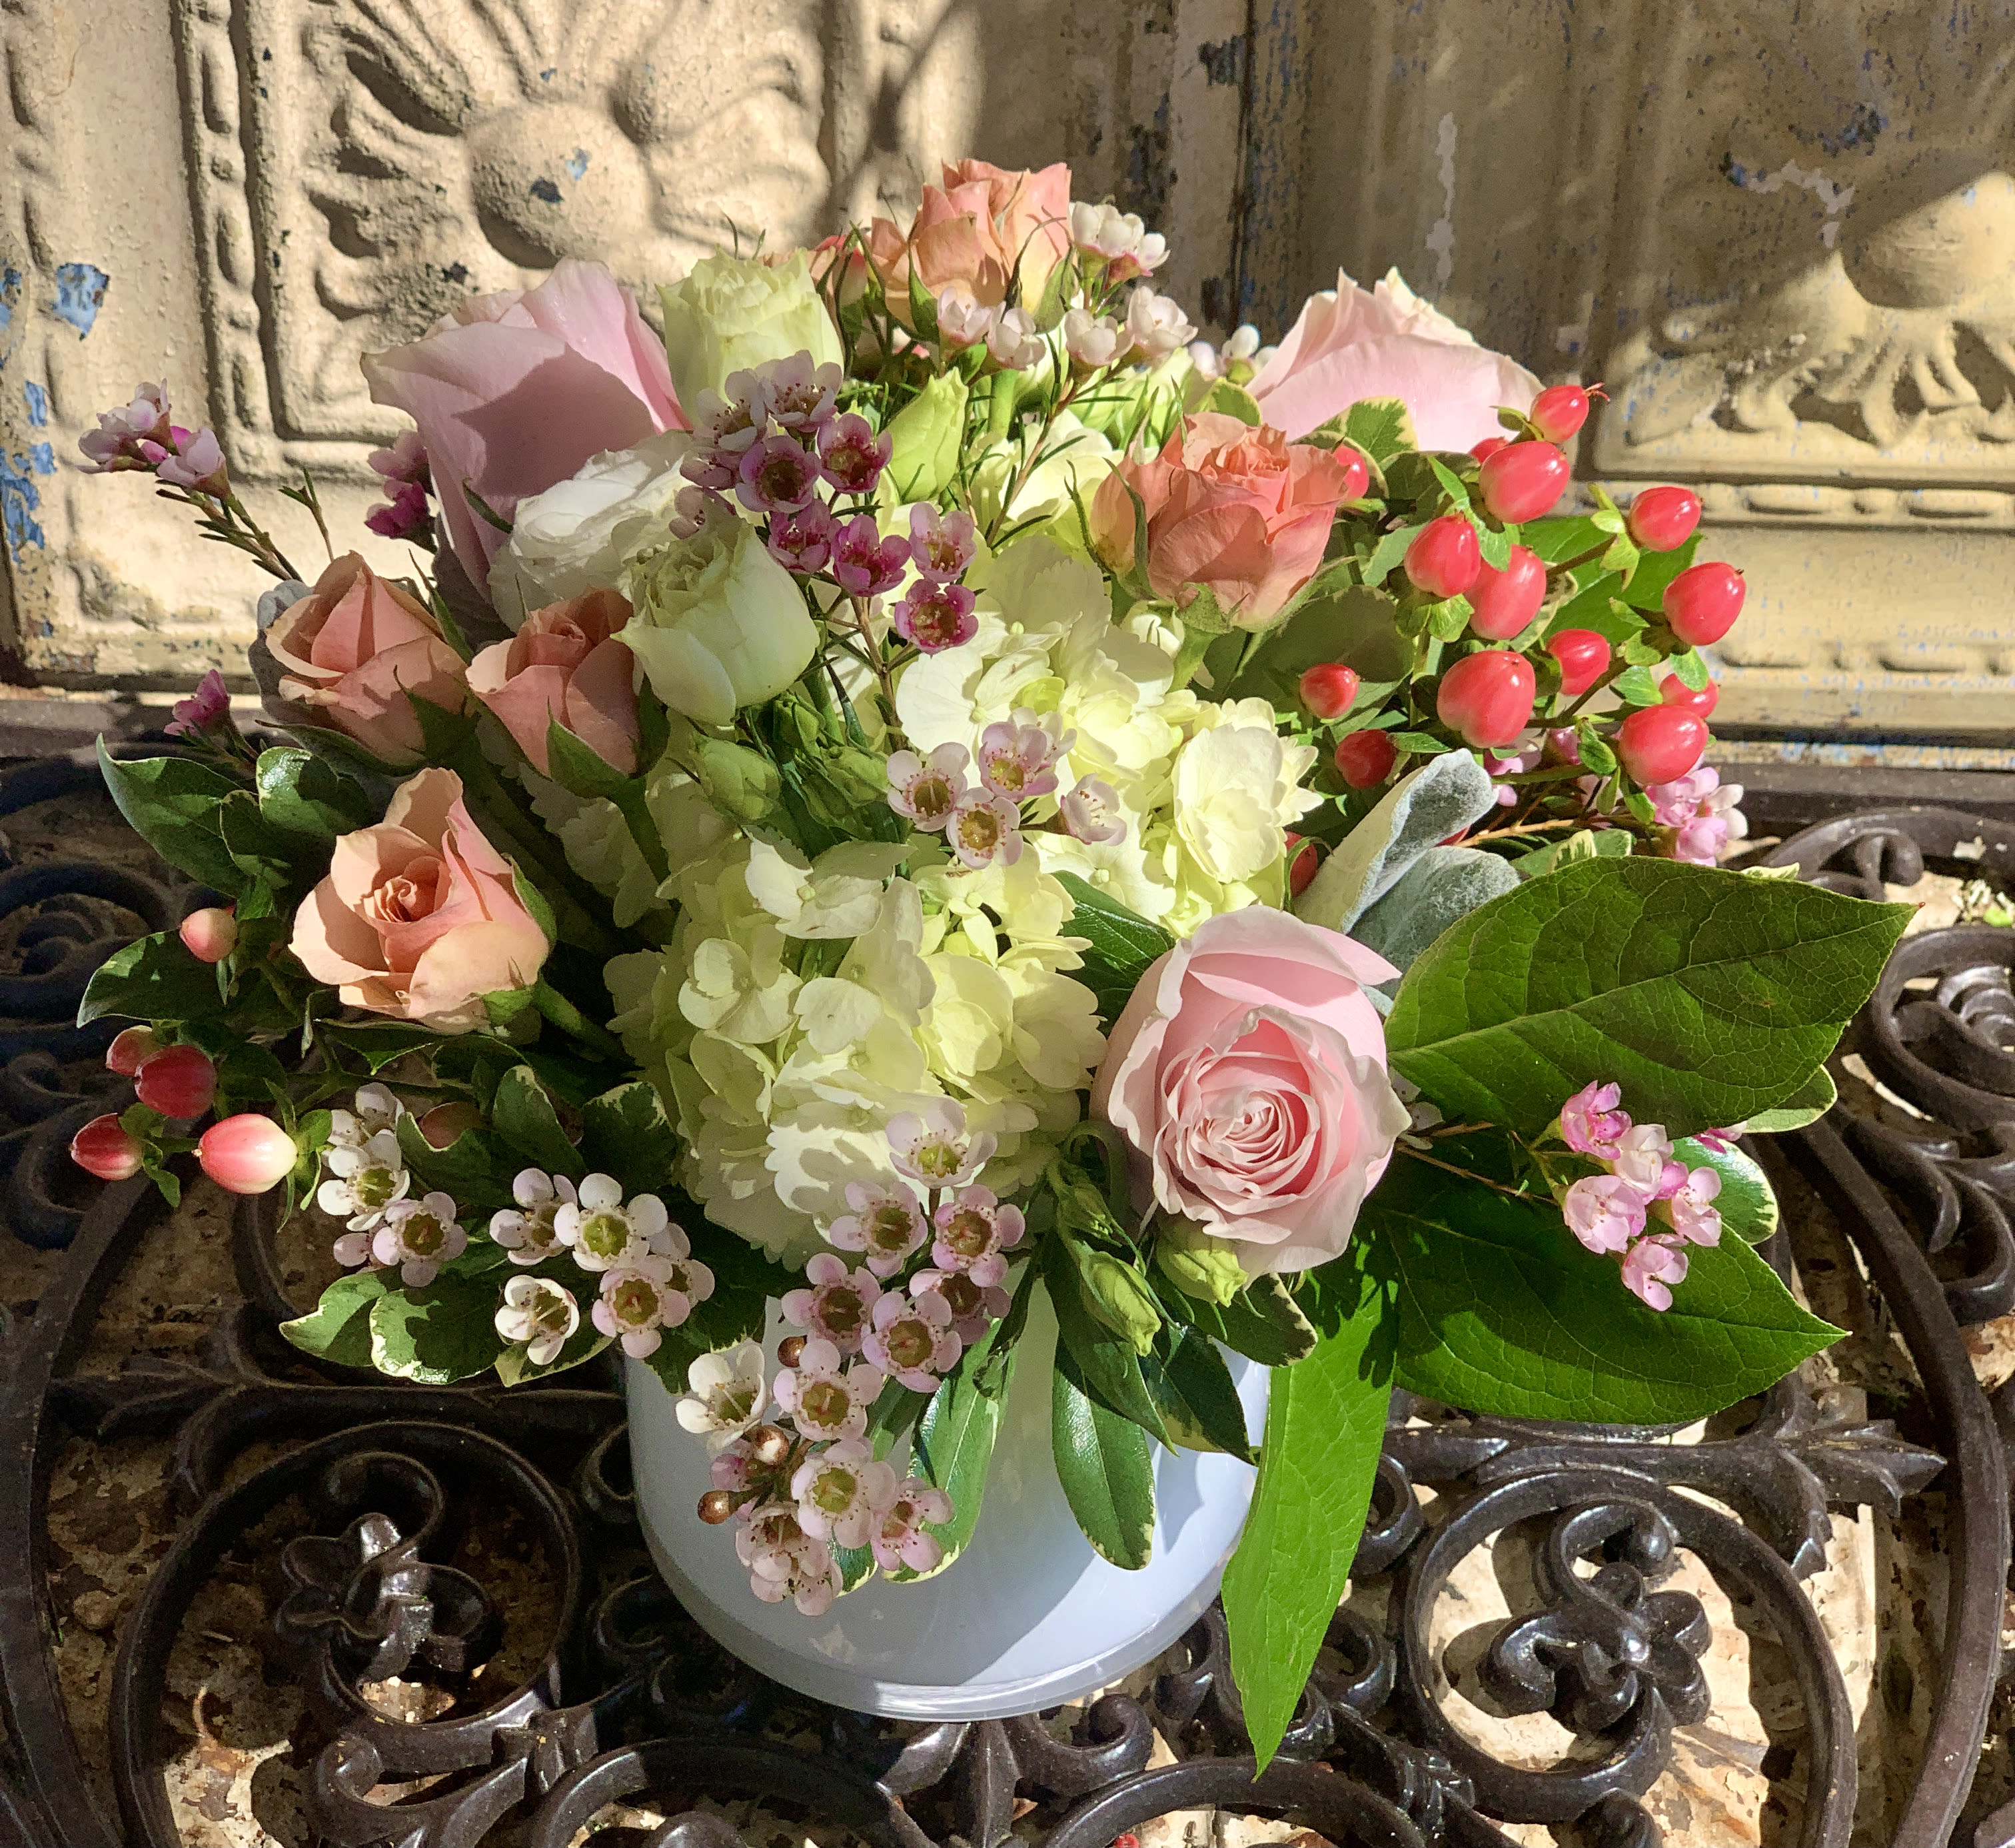 Nelson Mandela - Welcome in the spring time with this soft arrangement of hydrangeas, roses, lisianthus, wax flowers, dusty miller, hypericum berries, and assorted foliage.